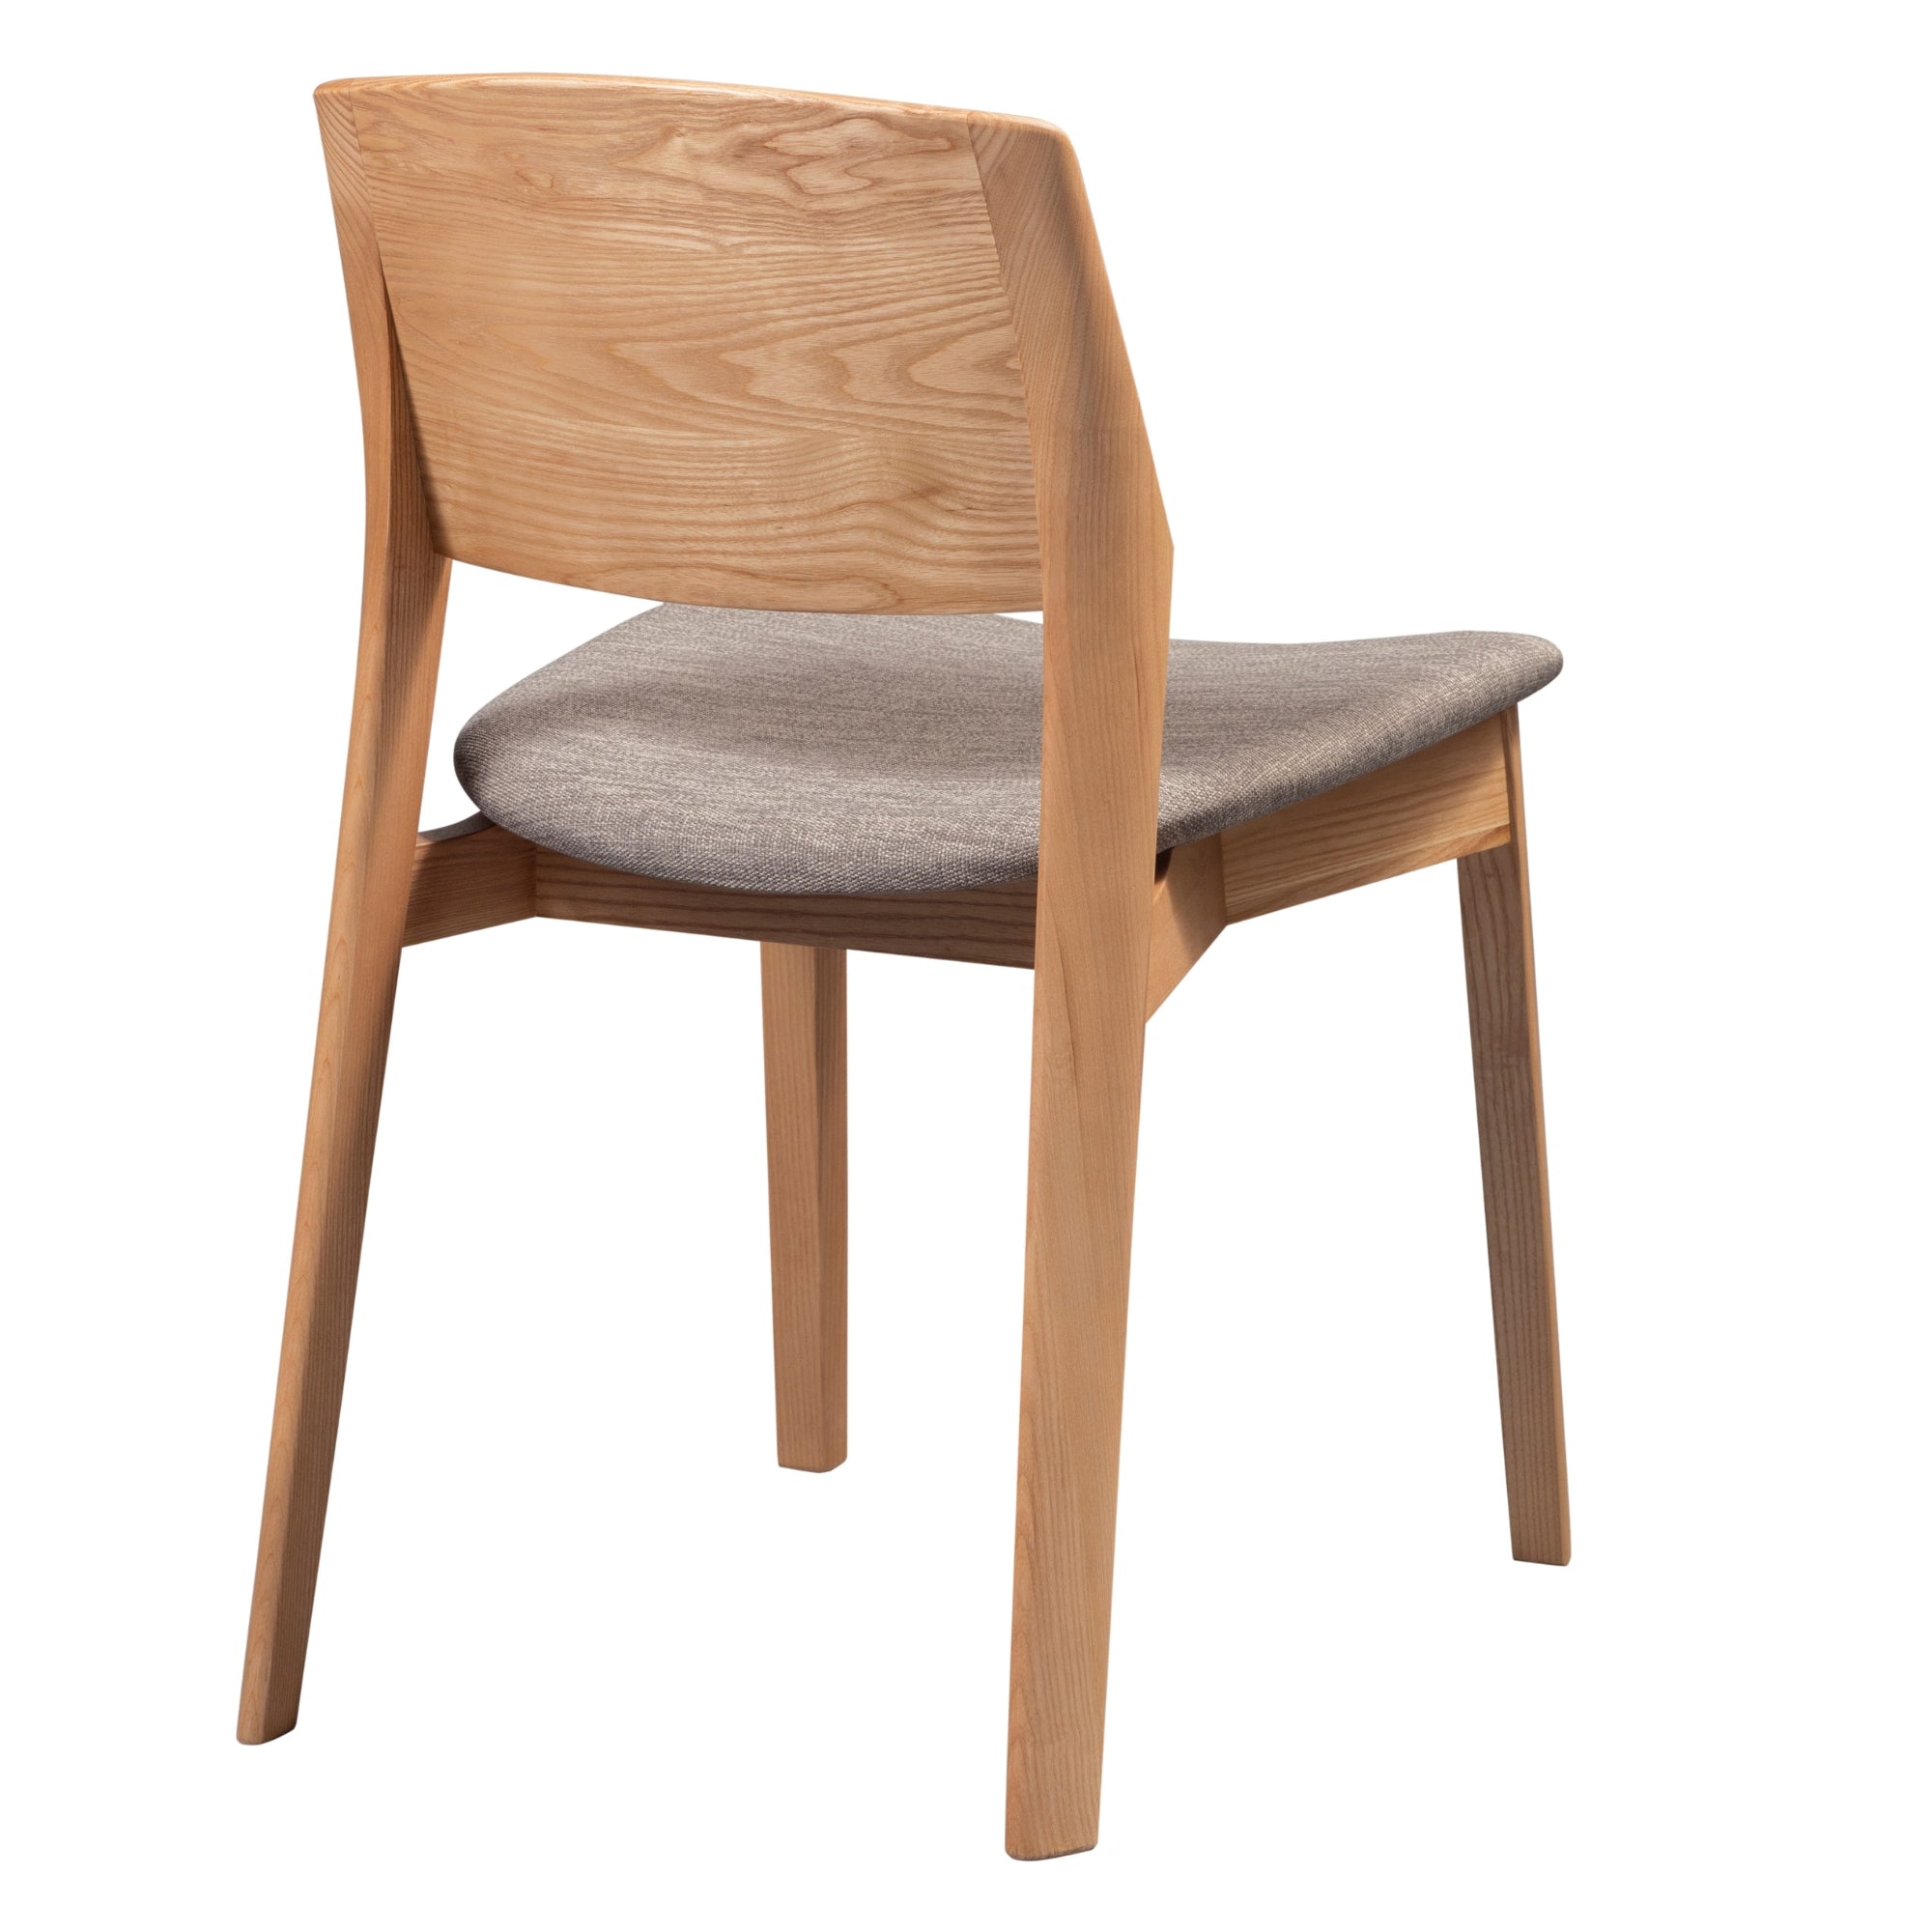 6pc Oak Dining Chairs, Solid Ash Wood, Fabric Seat